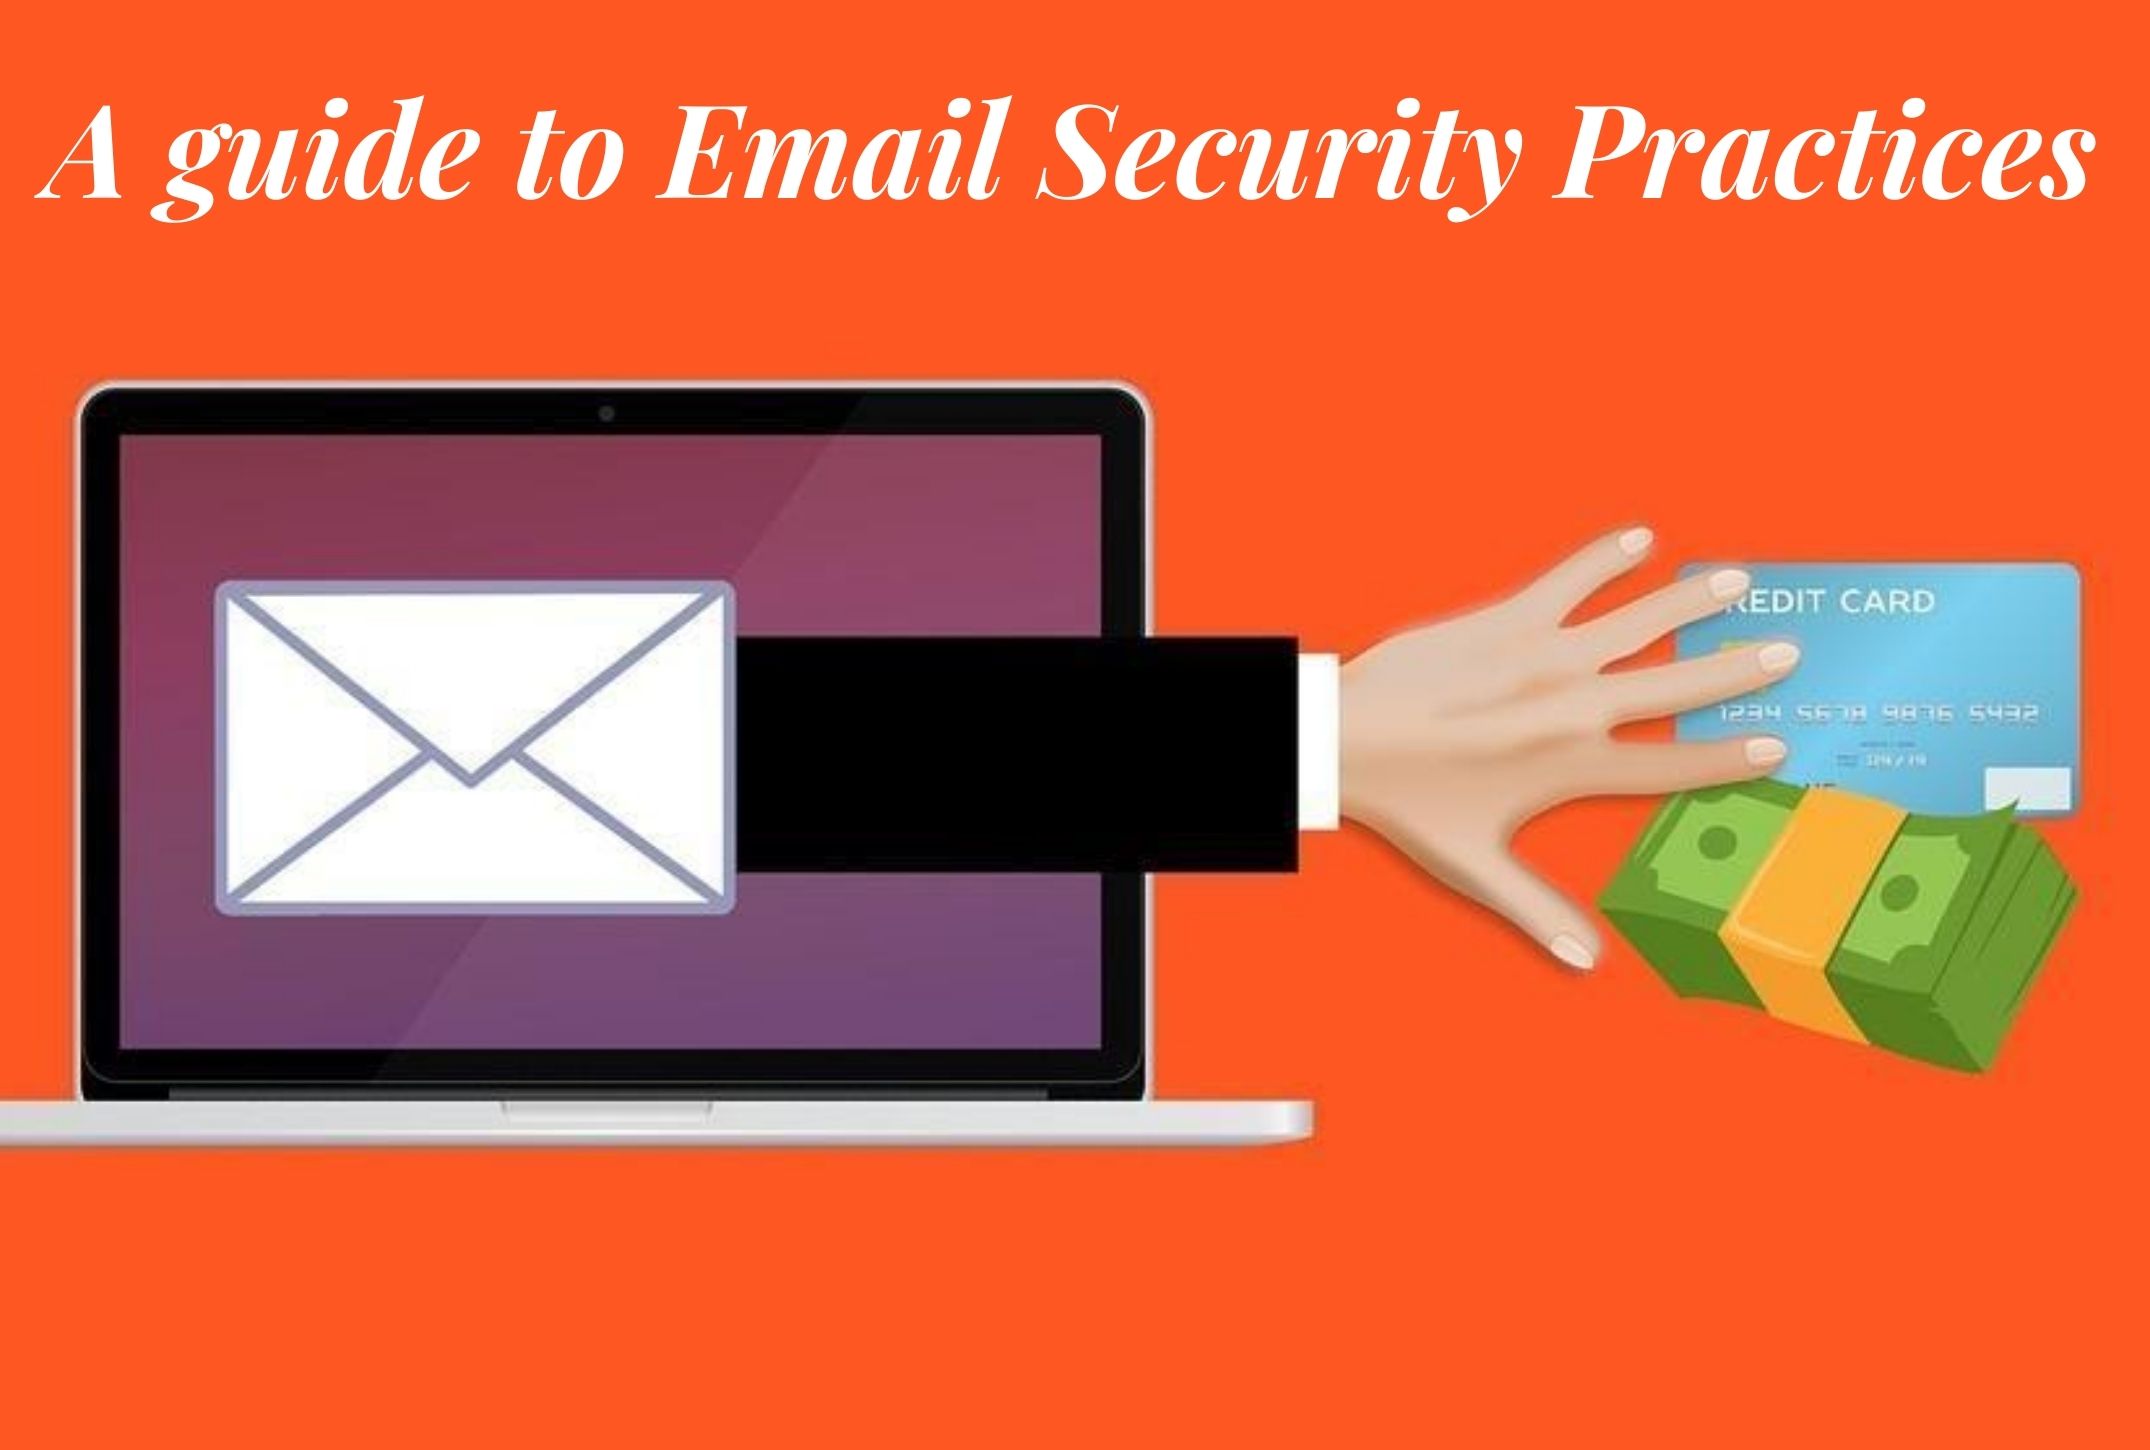 A guide to Email Security Practices